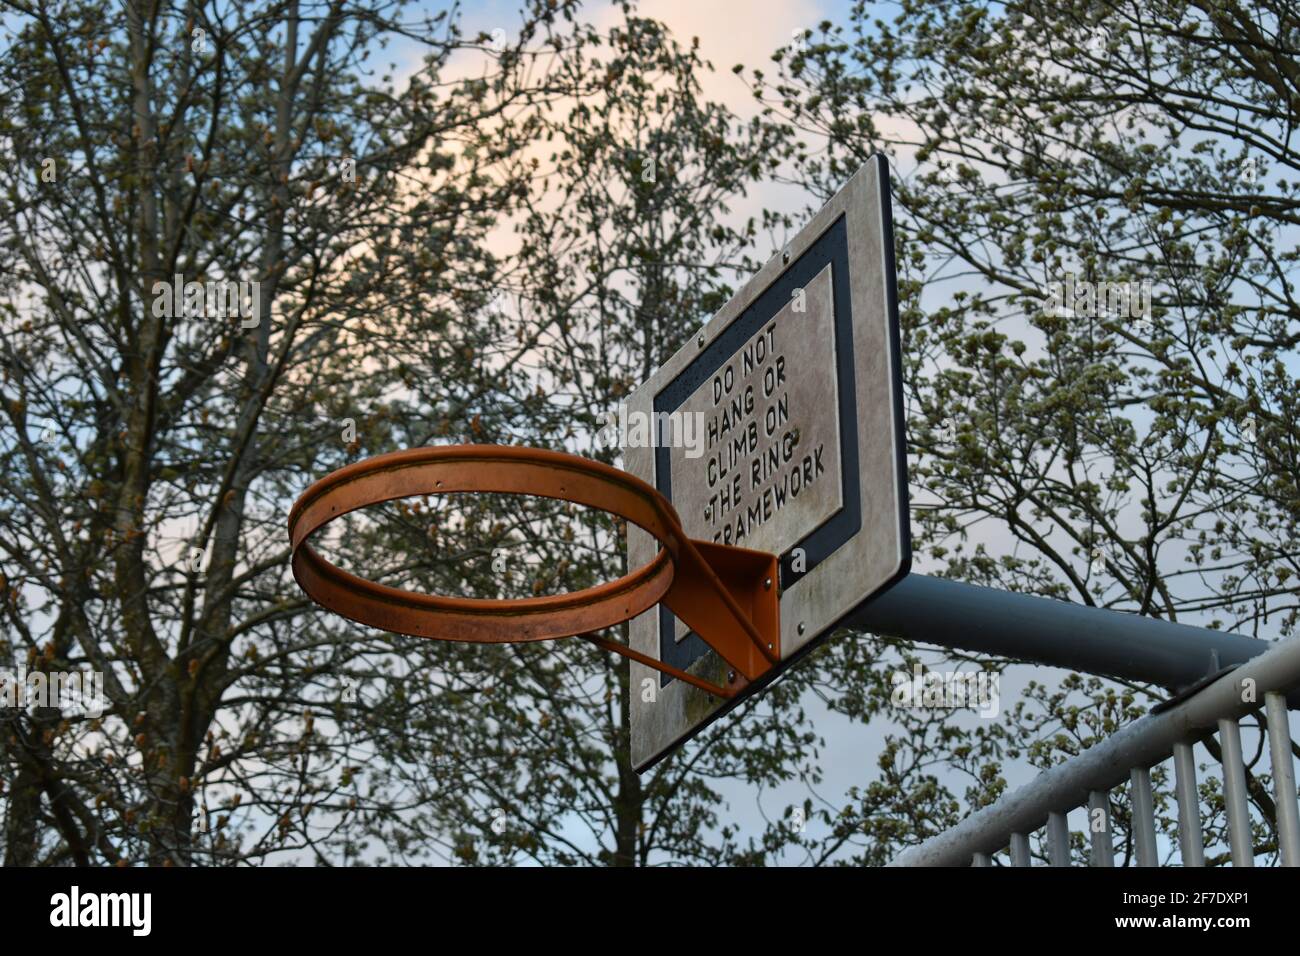 Baseball hoop with the notice: 'Do not hang or climb on the ring'. Stock Photo